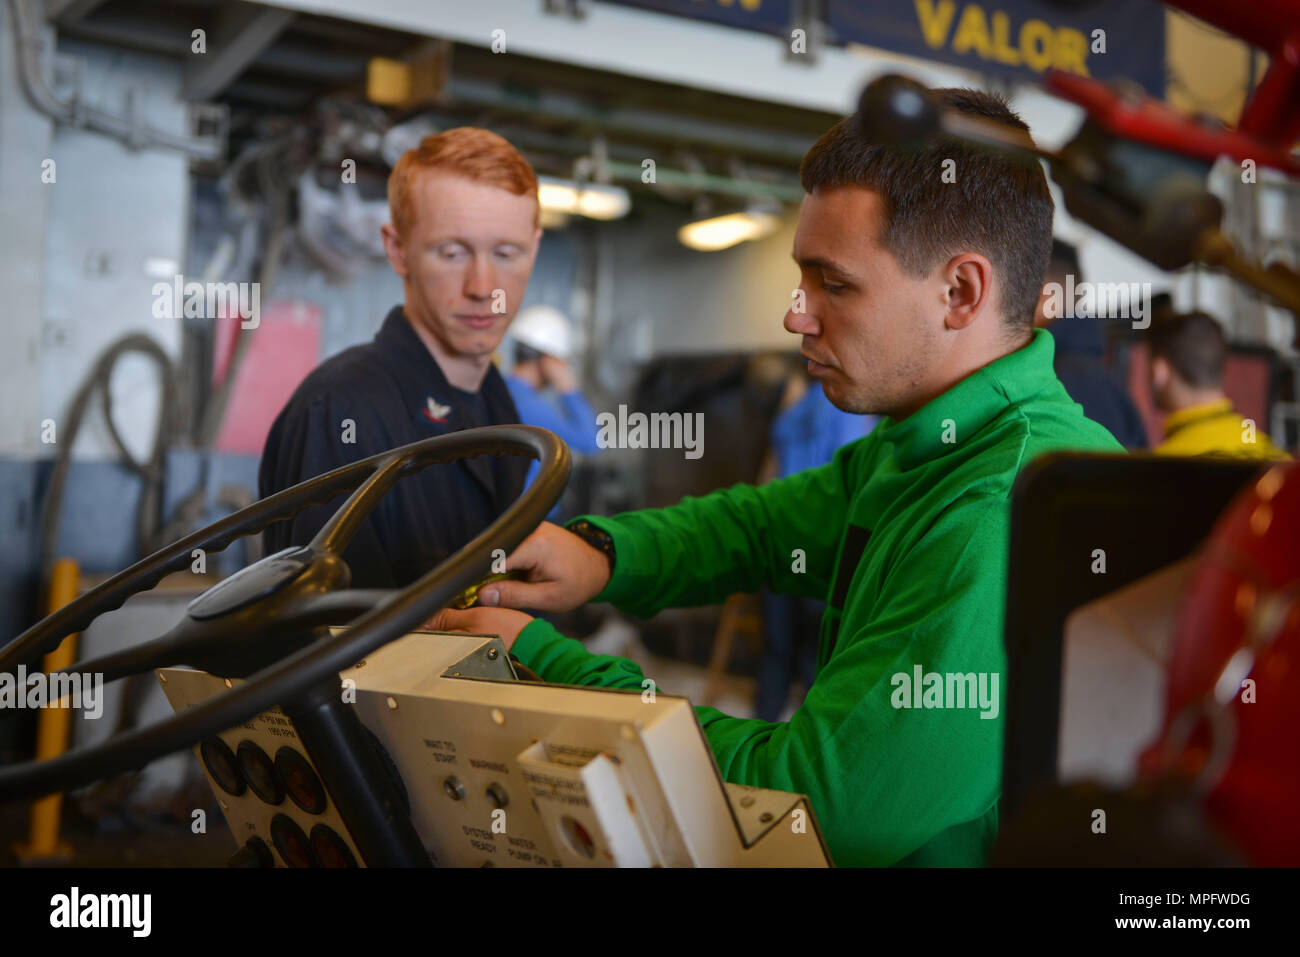 ATLANTIC OCEAN (March 9, 2017) – Aviation Support Equipment Technician 3rd Class Lane Nobile observes as Aviation Support Equipment Technician 2nd Class Matthew Fontenot repairs the control panel of an A/S32P-25A firefighting vehicle in the hangar bay aboard amphibious assault ship USS Iwo Jima (LHD 7). Iwo Jima is underway conducting a series of qualifications and certifications as part of the basic phase of training in preparation for future operations and deployments. (U.S. Navy photo by Mass Communication Specialist 2nd Class Andrew Murray/Released) Stock Photo